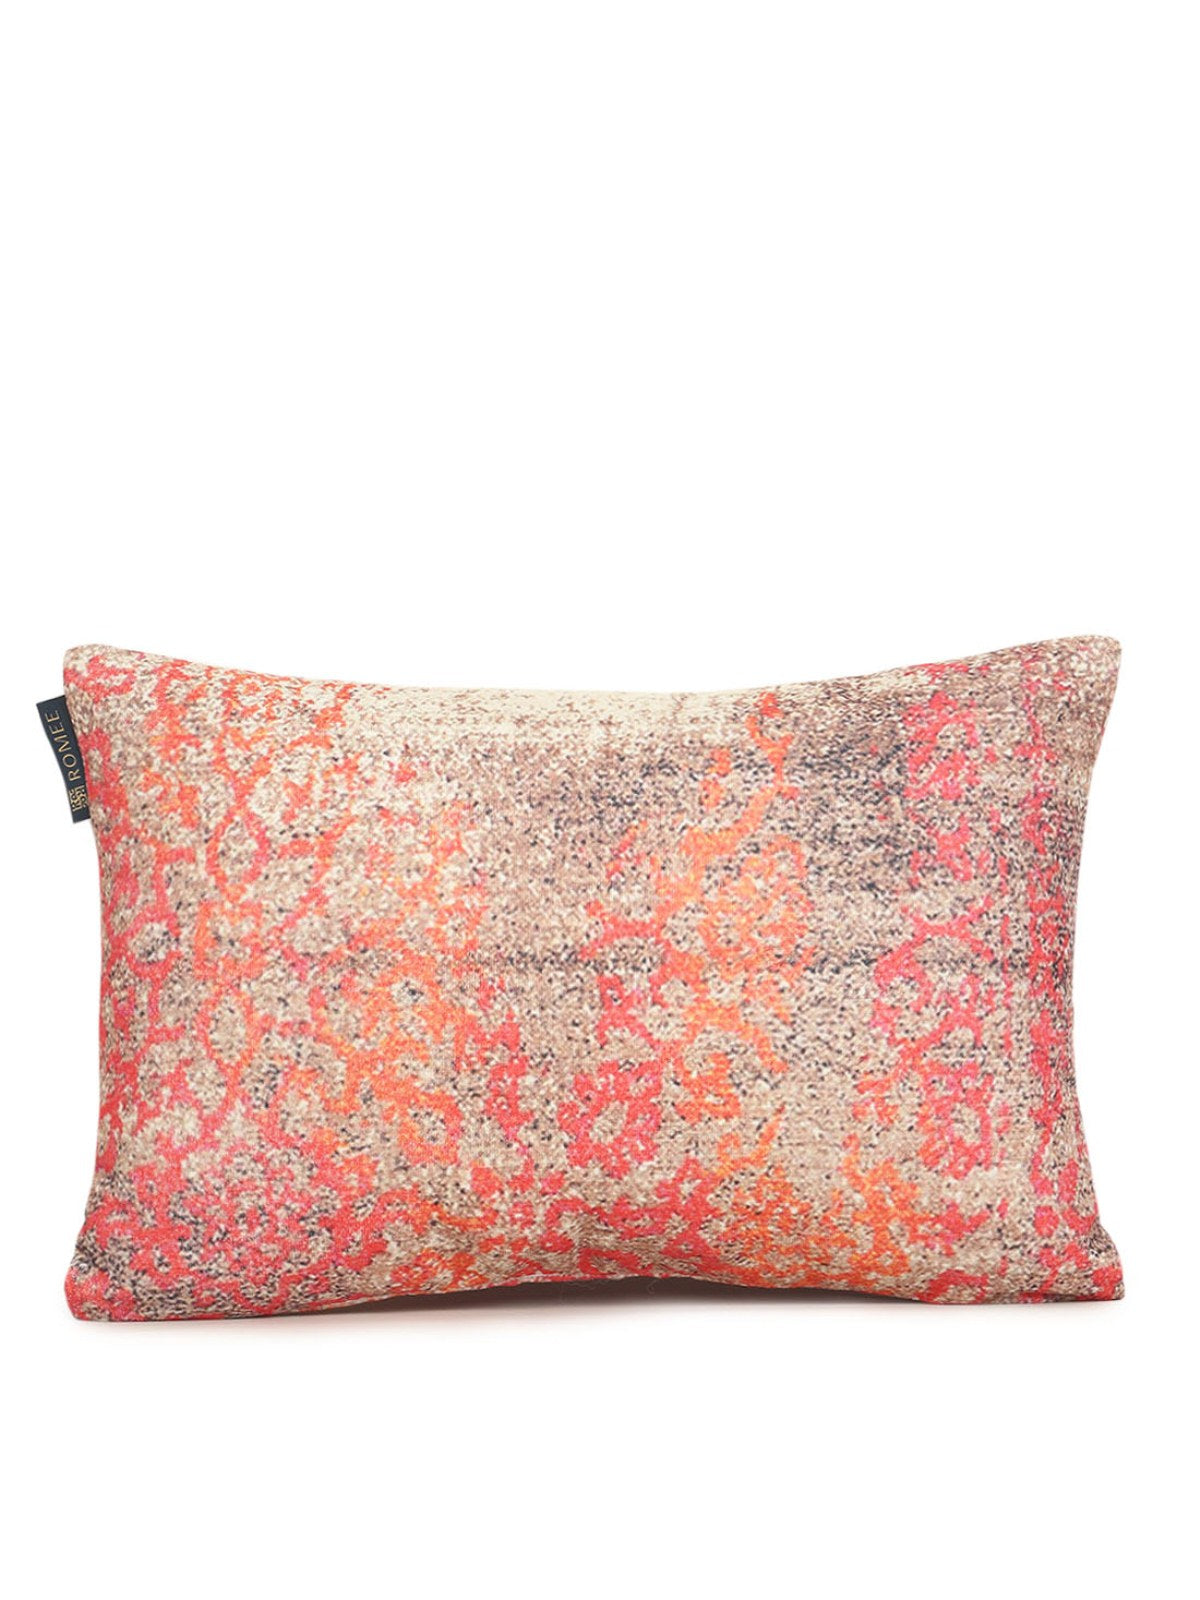 ROMEE Multicolor Ethnic Motifs Printed Cushion Covers Set of 2